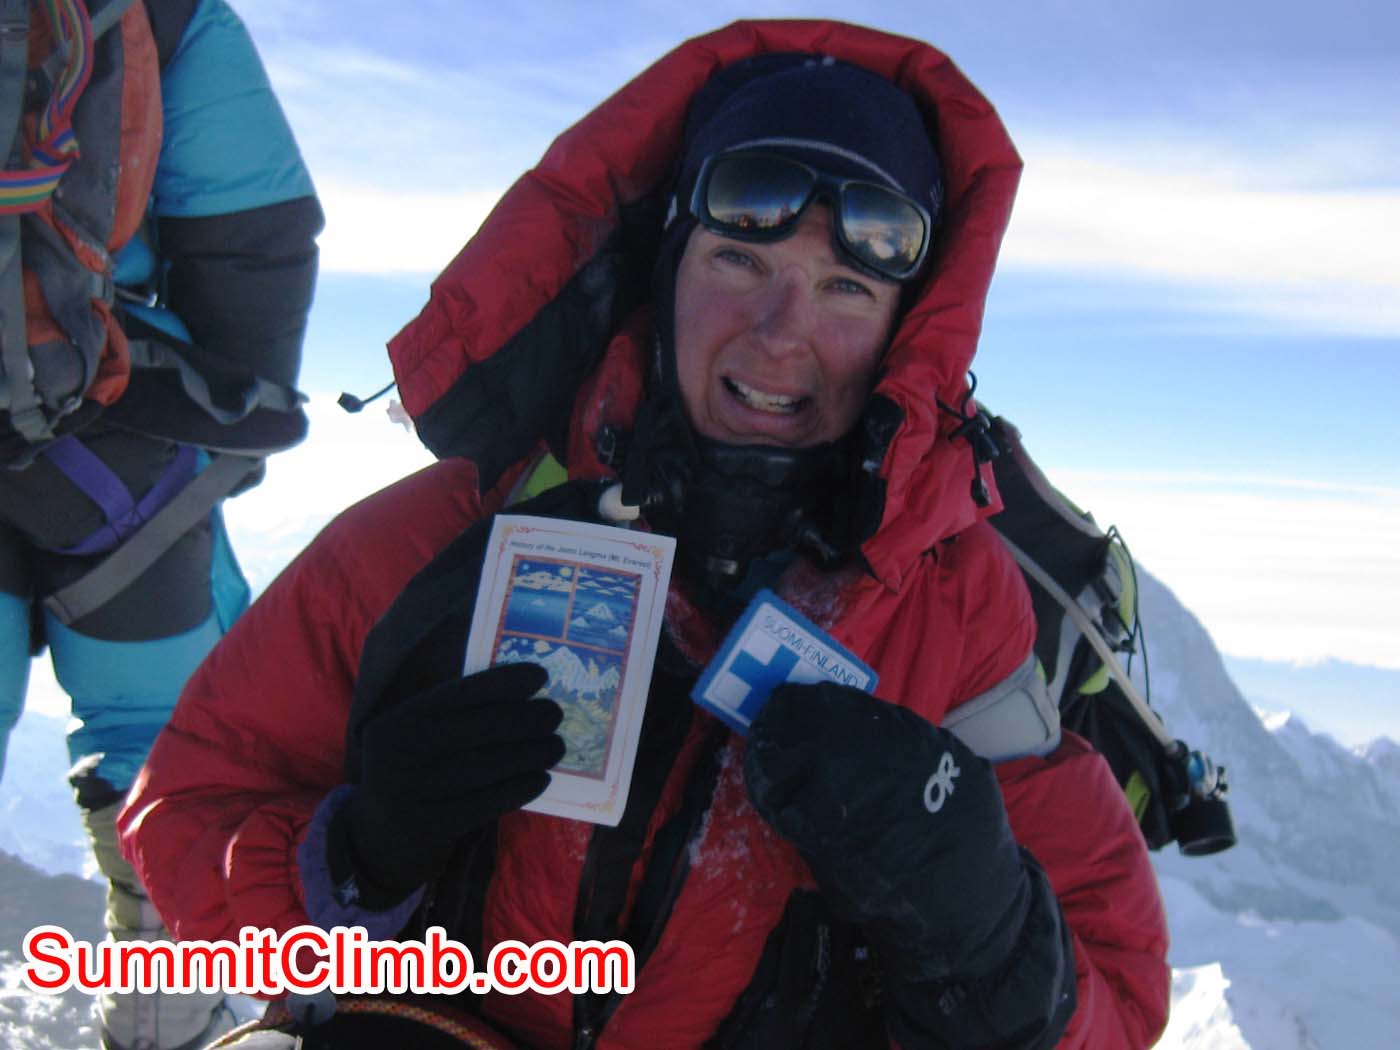 Mia Graeffe on Summit of Everest - First Female from Finland to summit Everest from Tibet - Photo Mia Graeffe